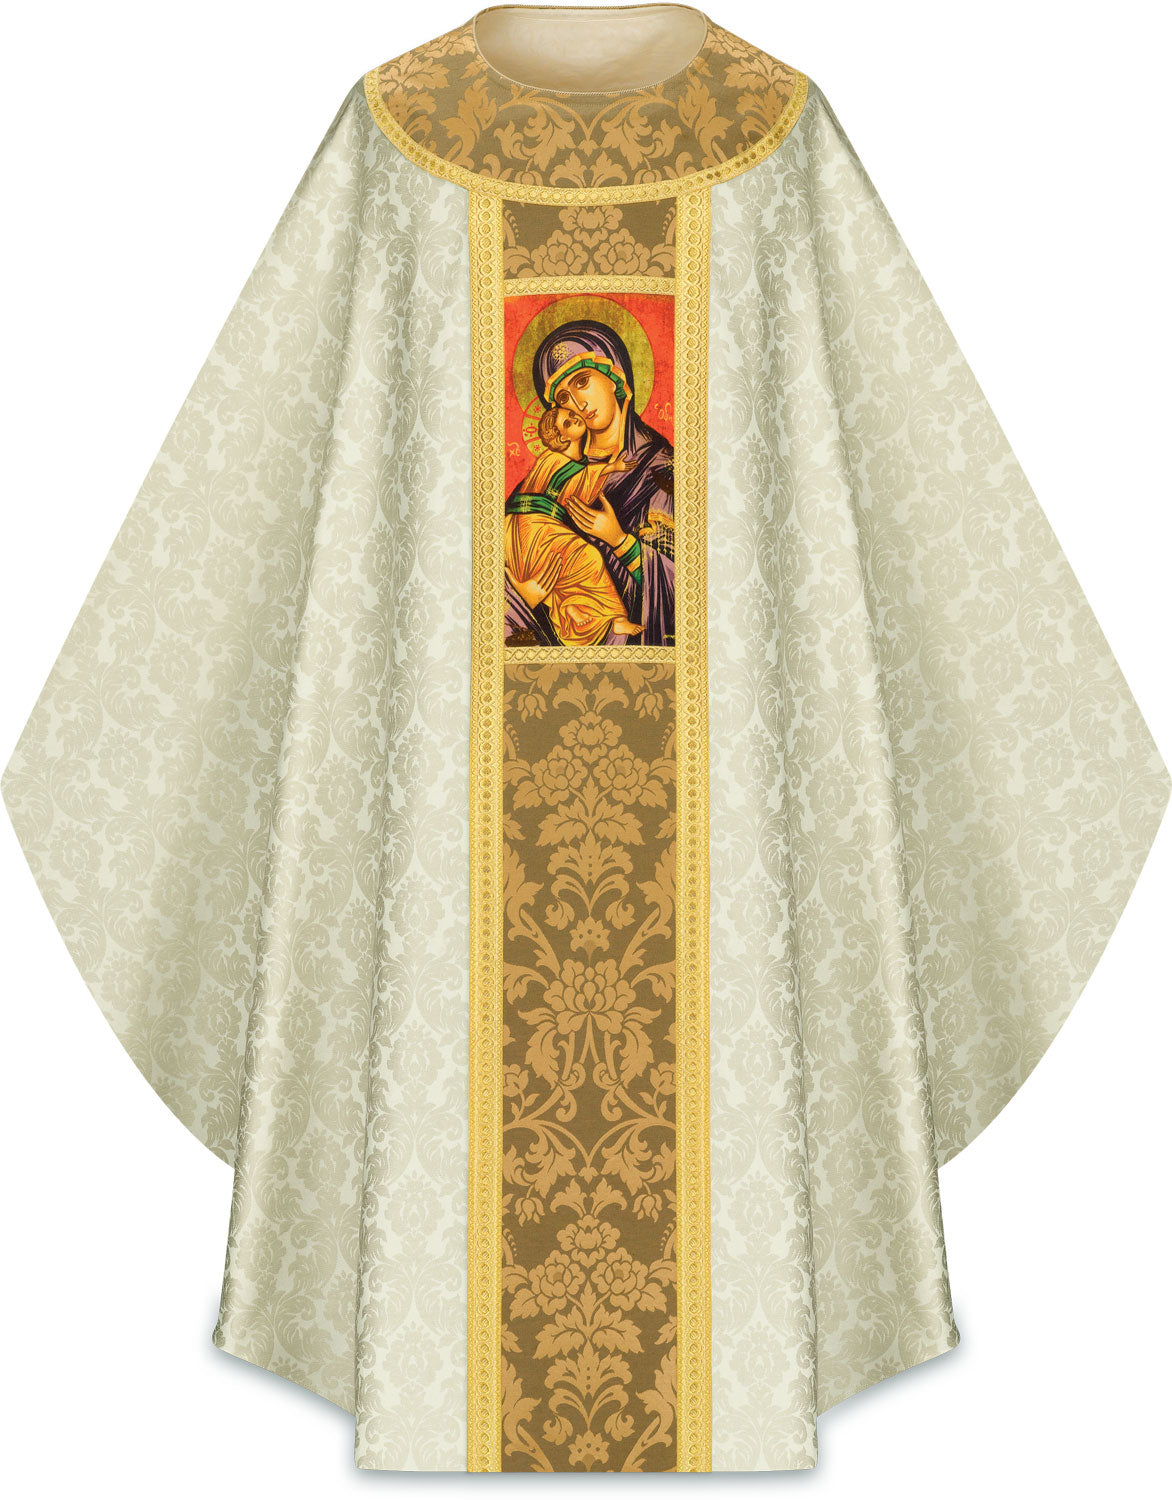 our-lady-of-perpetual-help-chasuble-5289.jpg